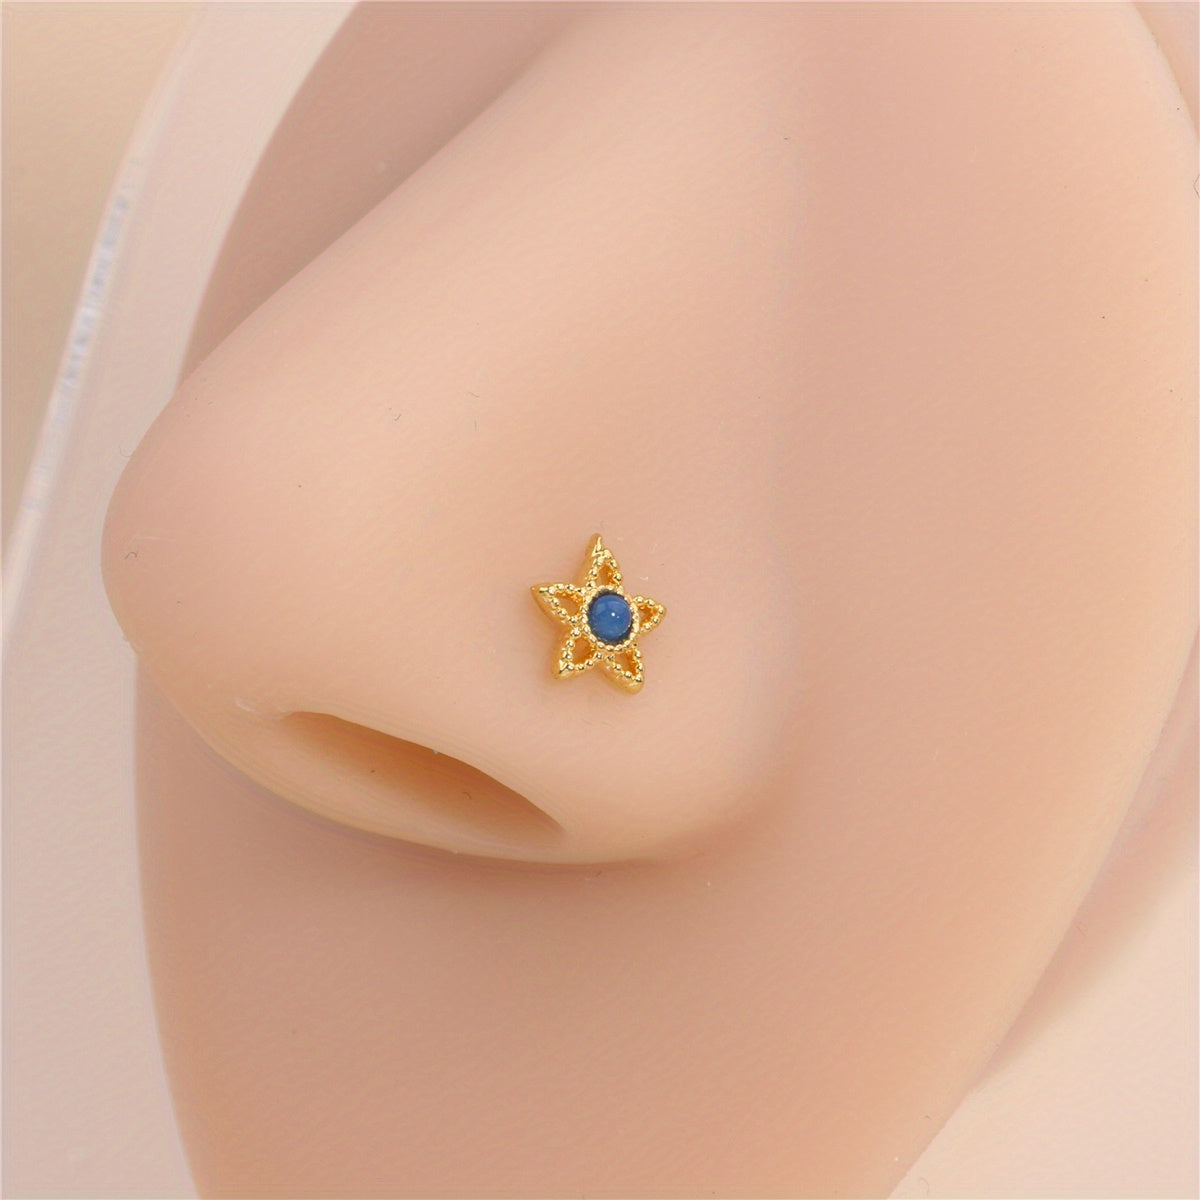 L Shaped Nose Rings Studs For Women Opal CZ Nose Piercing Jewelry 1pc